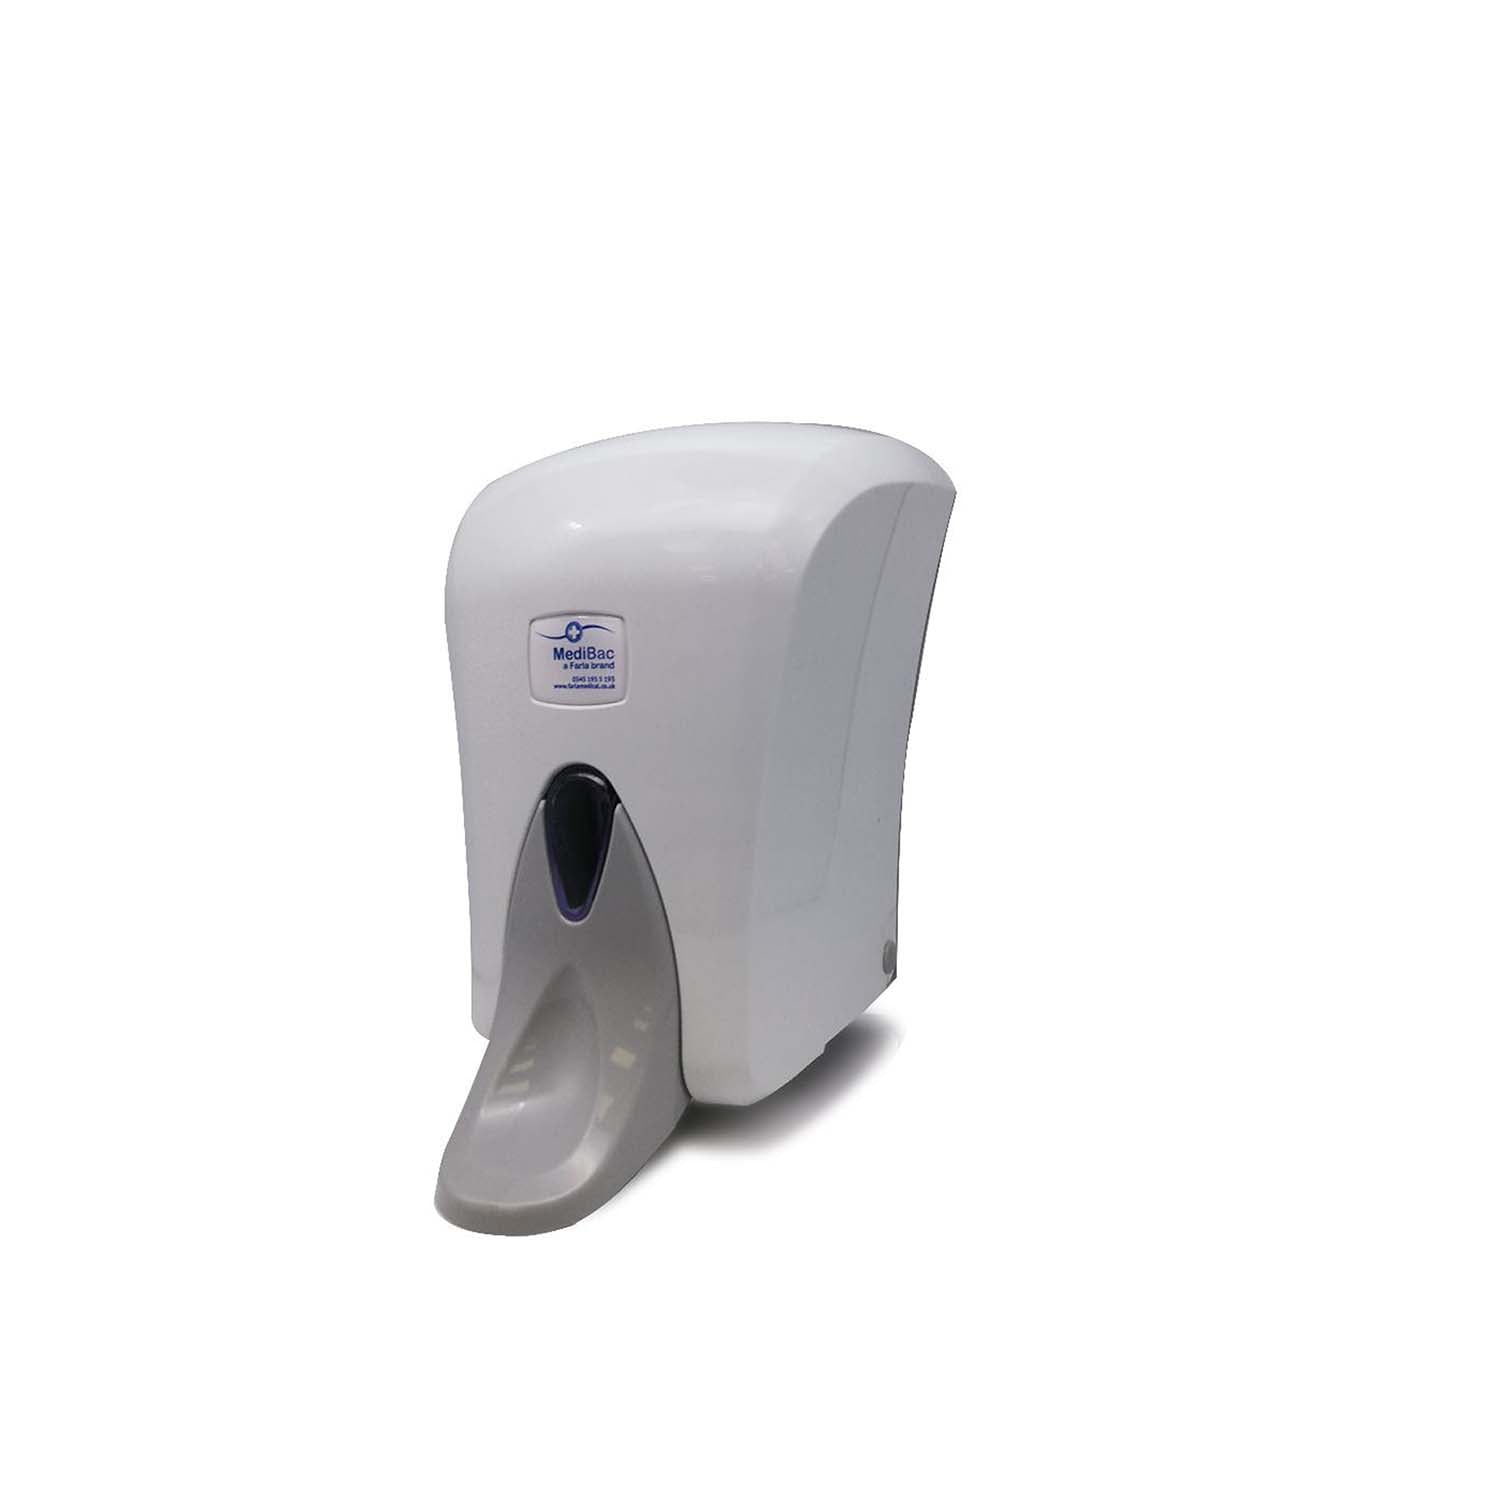 MediBac Dispenser | 1L | White | Bulk Fill. To be used with Product Code 6616